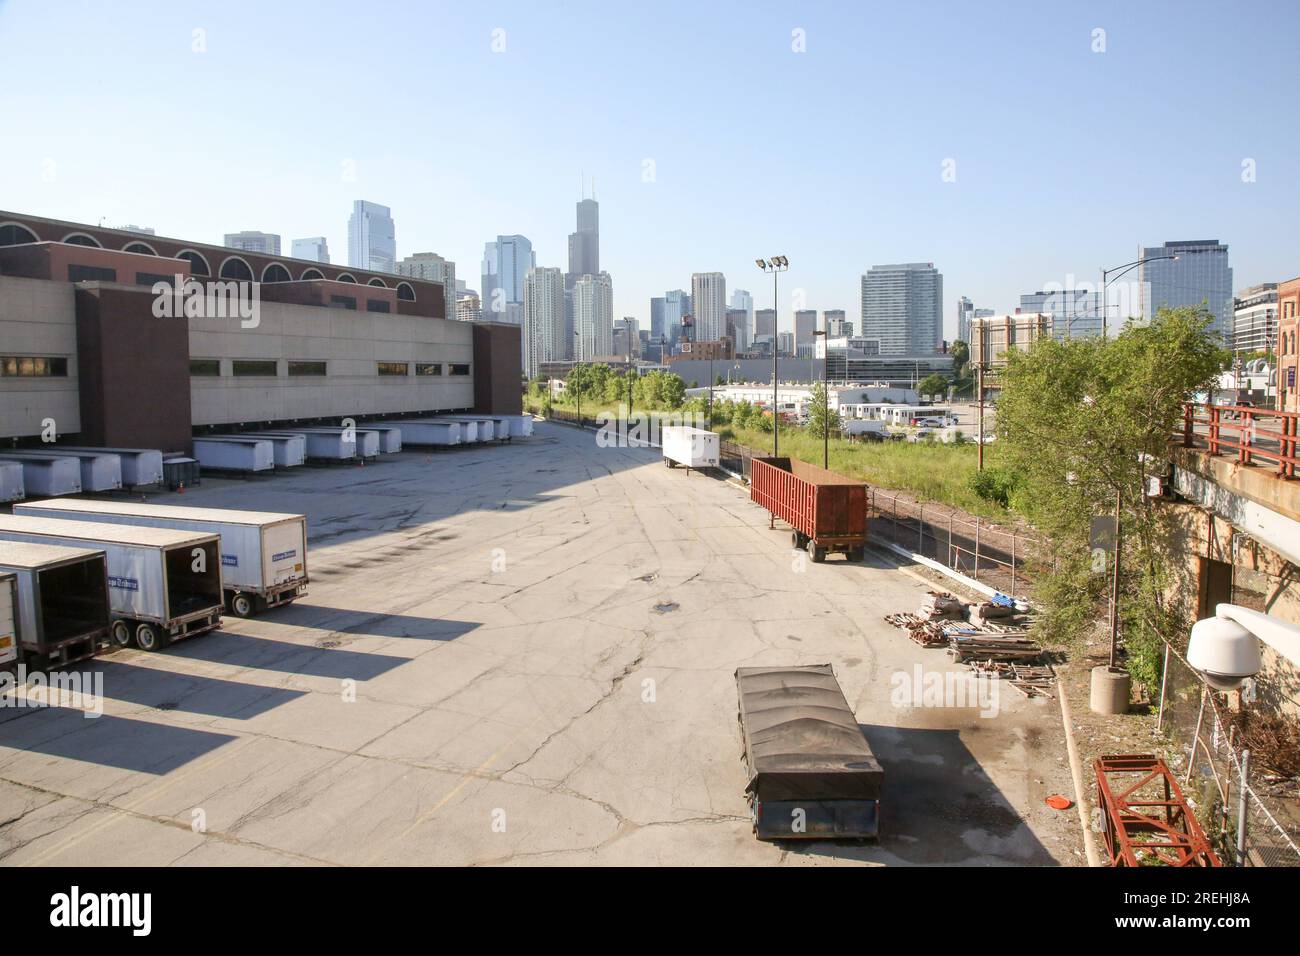 The site of the former Chicago Tribune Freedom Center printing plant sits vacant where a BallyÕs Chicago Casino will be built in River West, Chicago on July 27, 2023. BallyÕs became the TribuneÕs landlord when it bought the 30-acre site for $200 million and issued a sale leaseback on the land after it was approved by ChicagoÕs City Hall. The casino is expected to open in 2026. (Photos By: Alexandra Buxbaum/Sips USA) Credit: Sipa USA/Alamy Live News Stock Photo